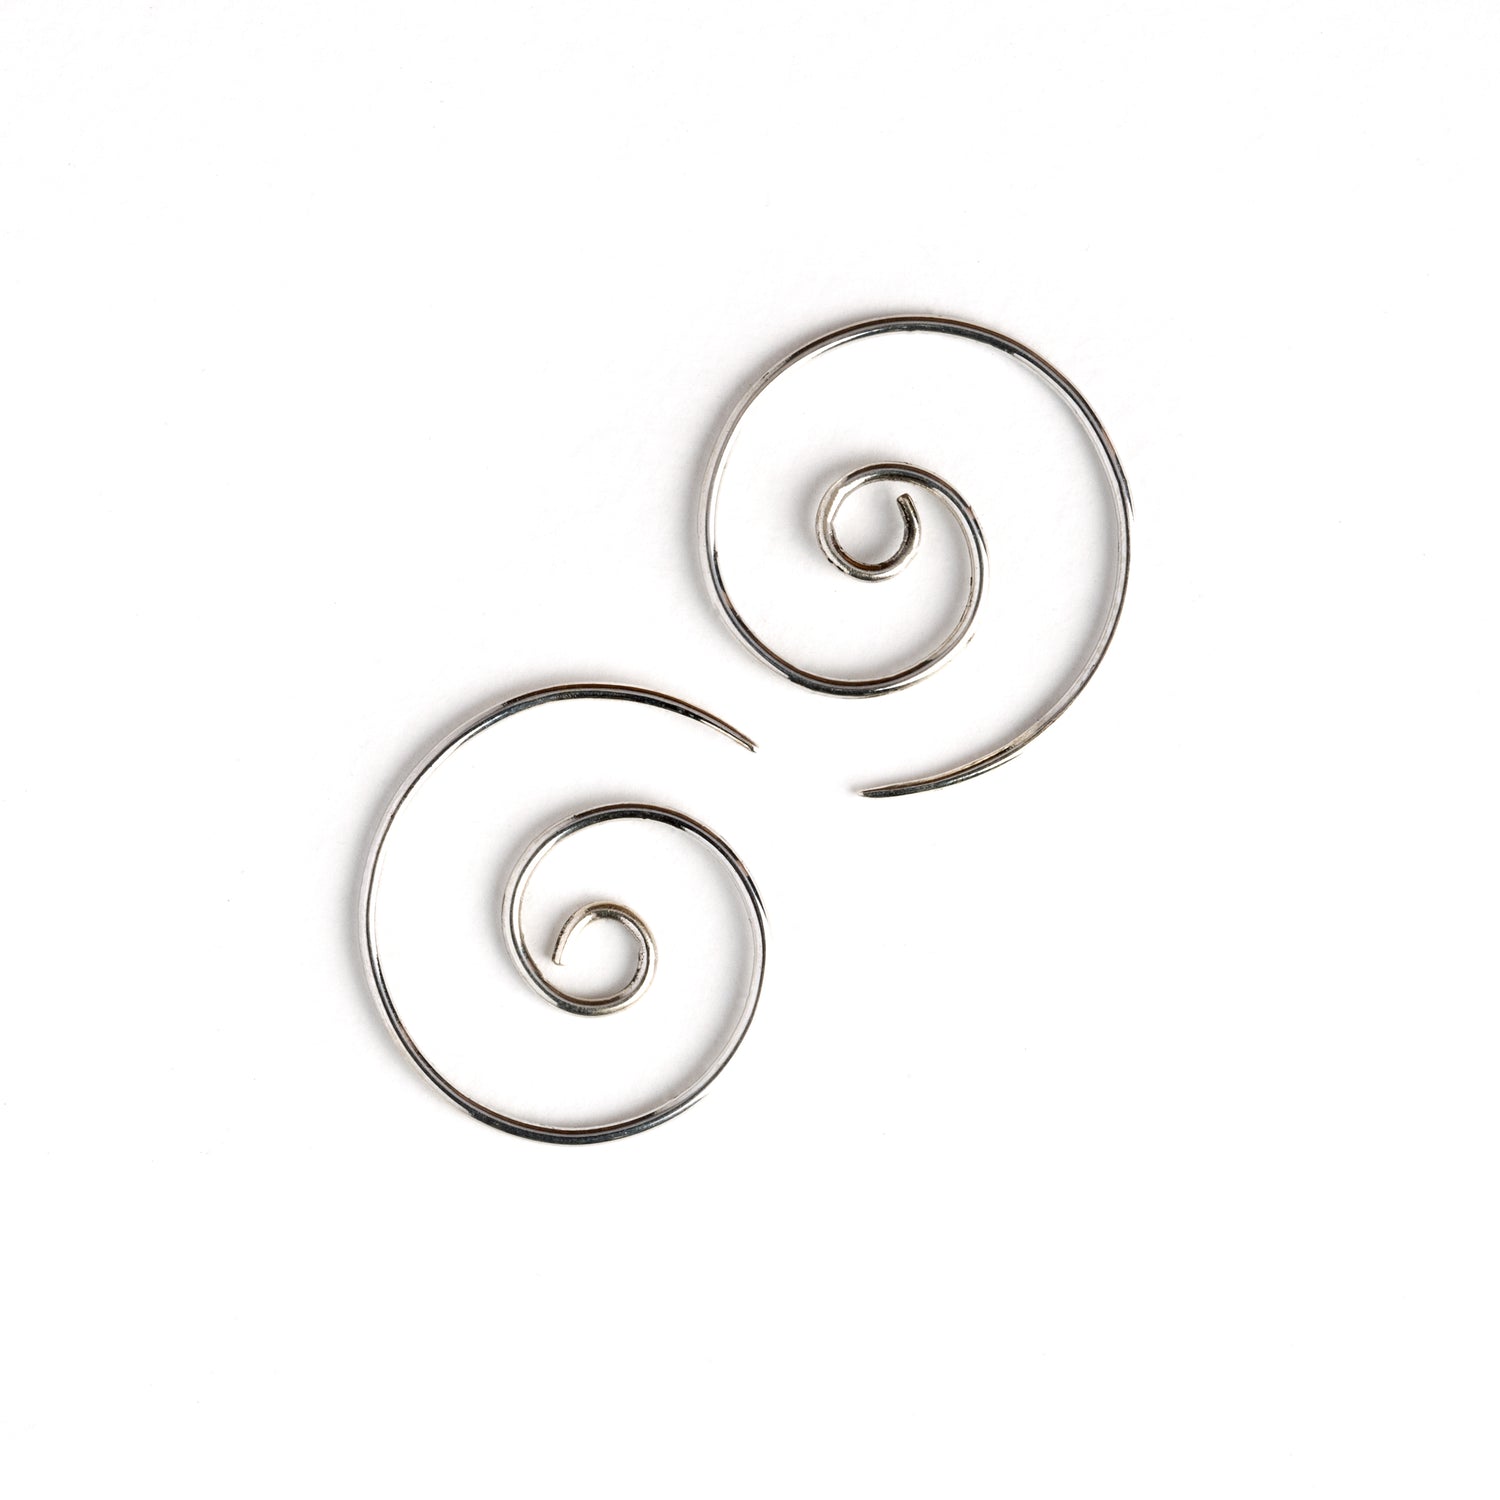 pair of silver spiral wire earrings side view